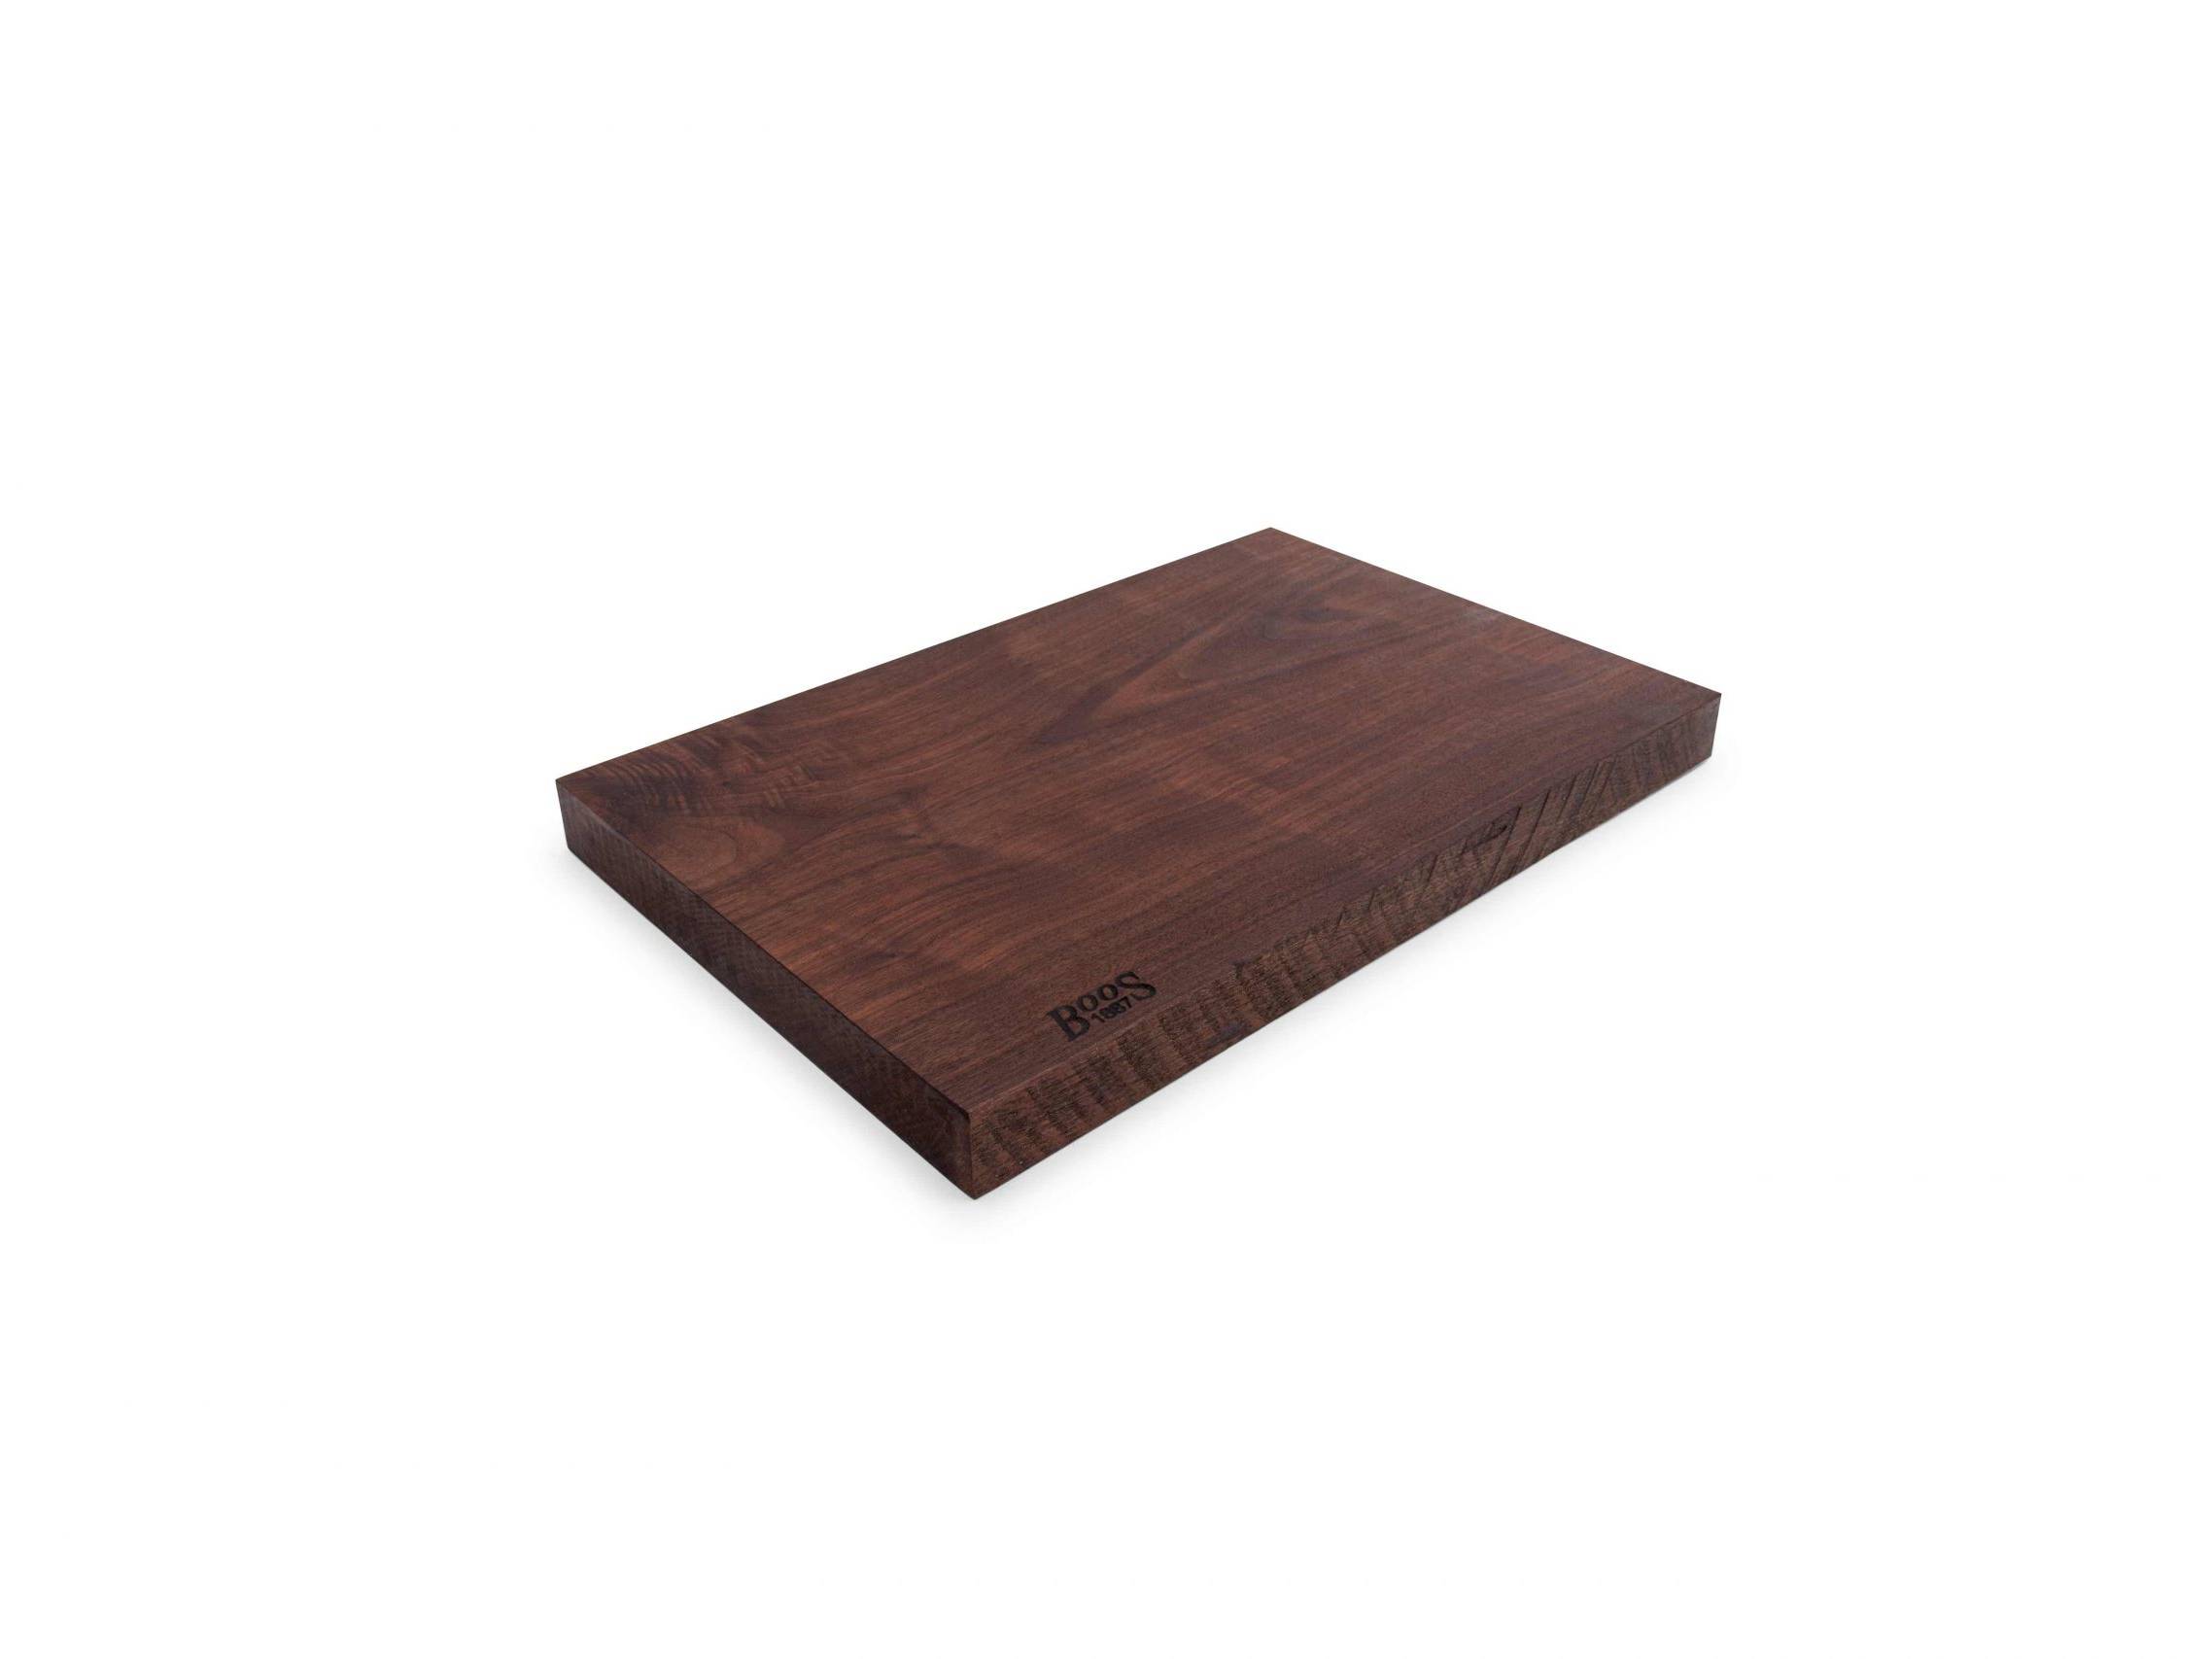 Boos 1887 / Rustic Edge one-piece chopping board; Black Walnut; can be used on both sides 9